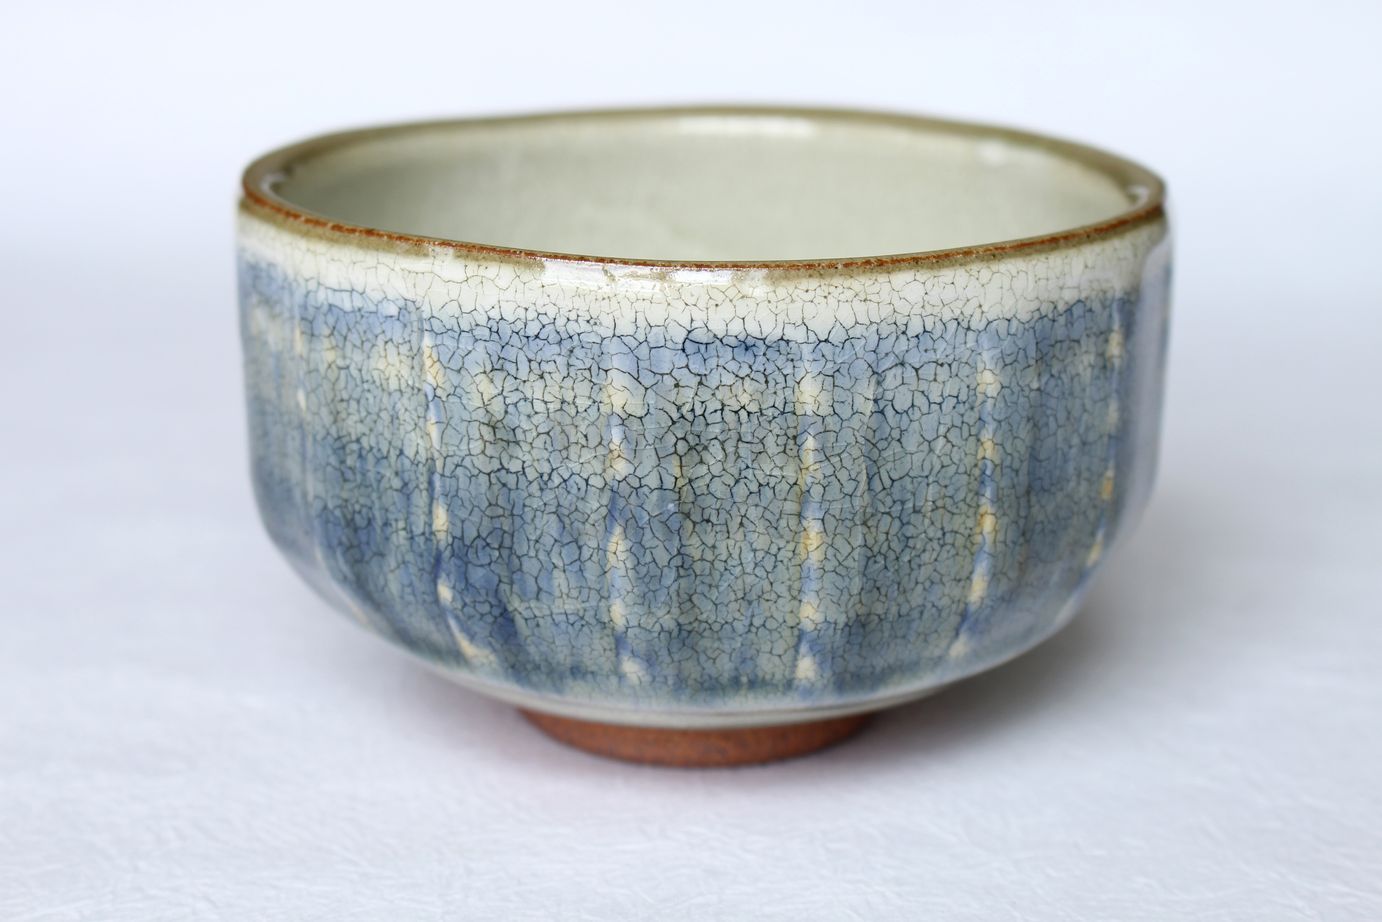 Matcha Ceramic Tea Bowl Handcrafted for Everyday Use Authentic Chawan for Traditional Tea Ceremony Aquamarine Blue Mino Japanese Pottery Style Bowls Hand Made in Japan Lead-Free